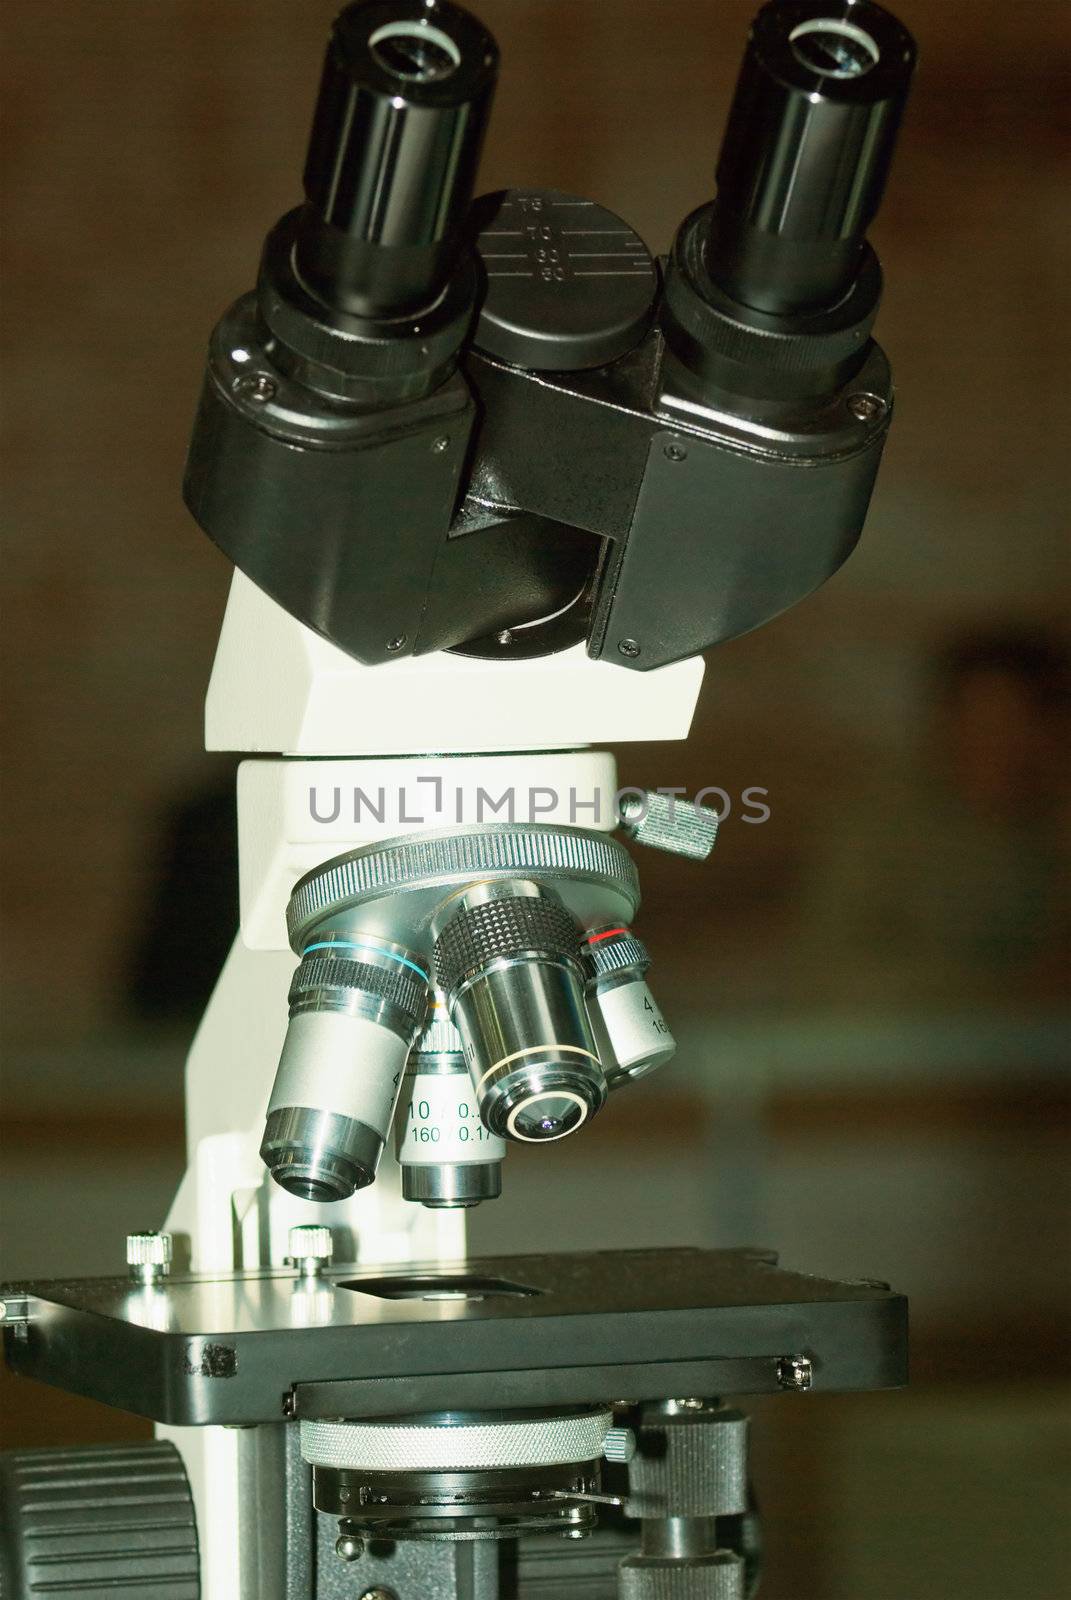 Photo of a professional ocular laboratory microscope with stereo eyepiece